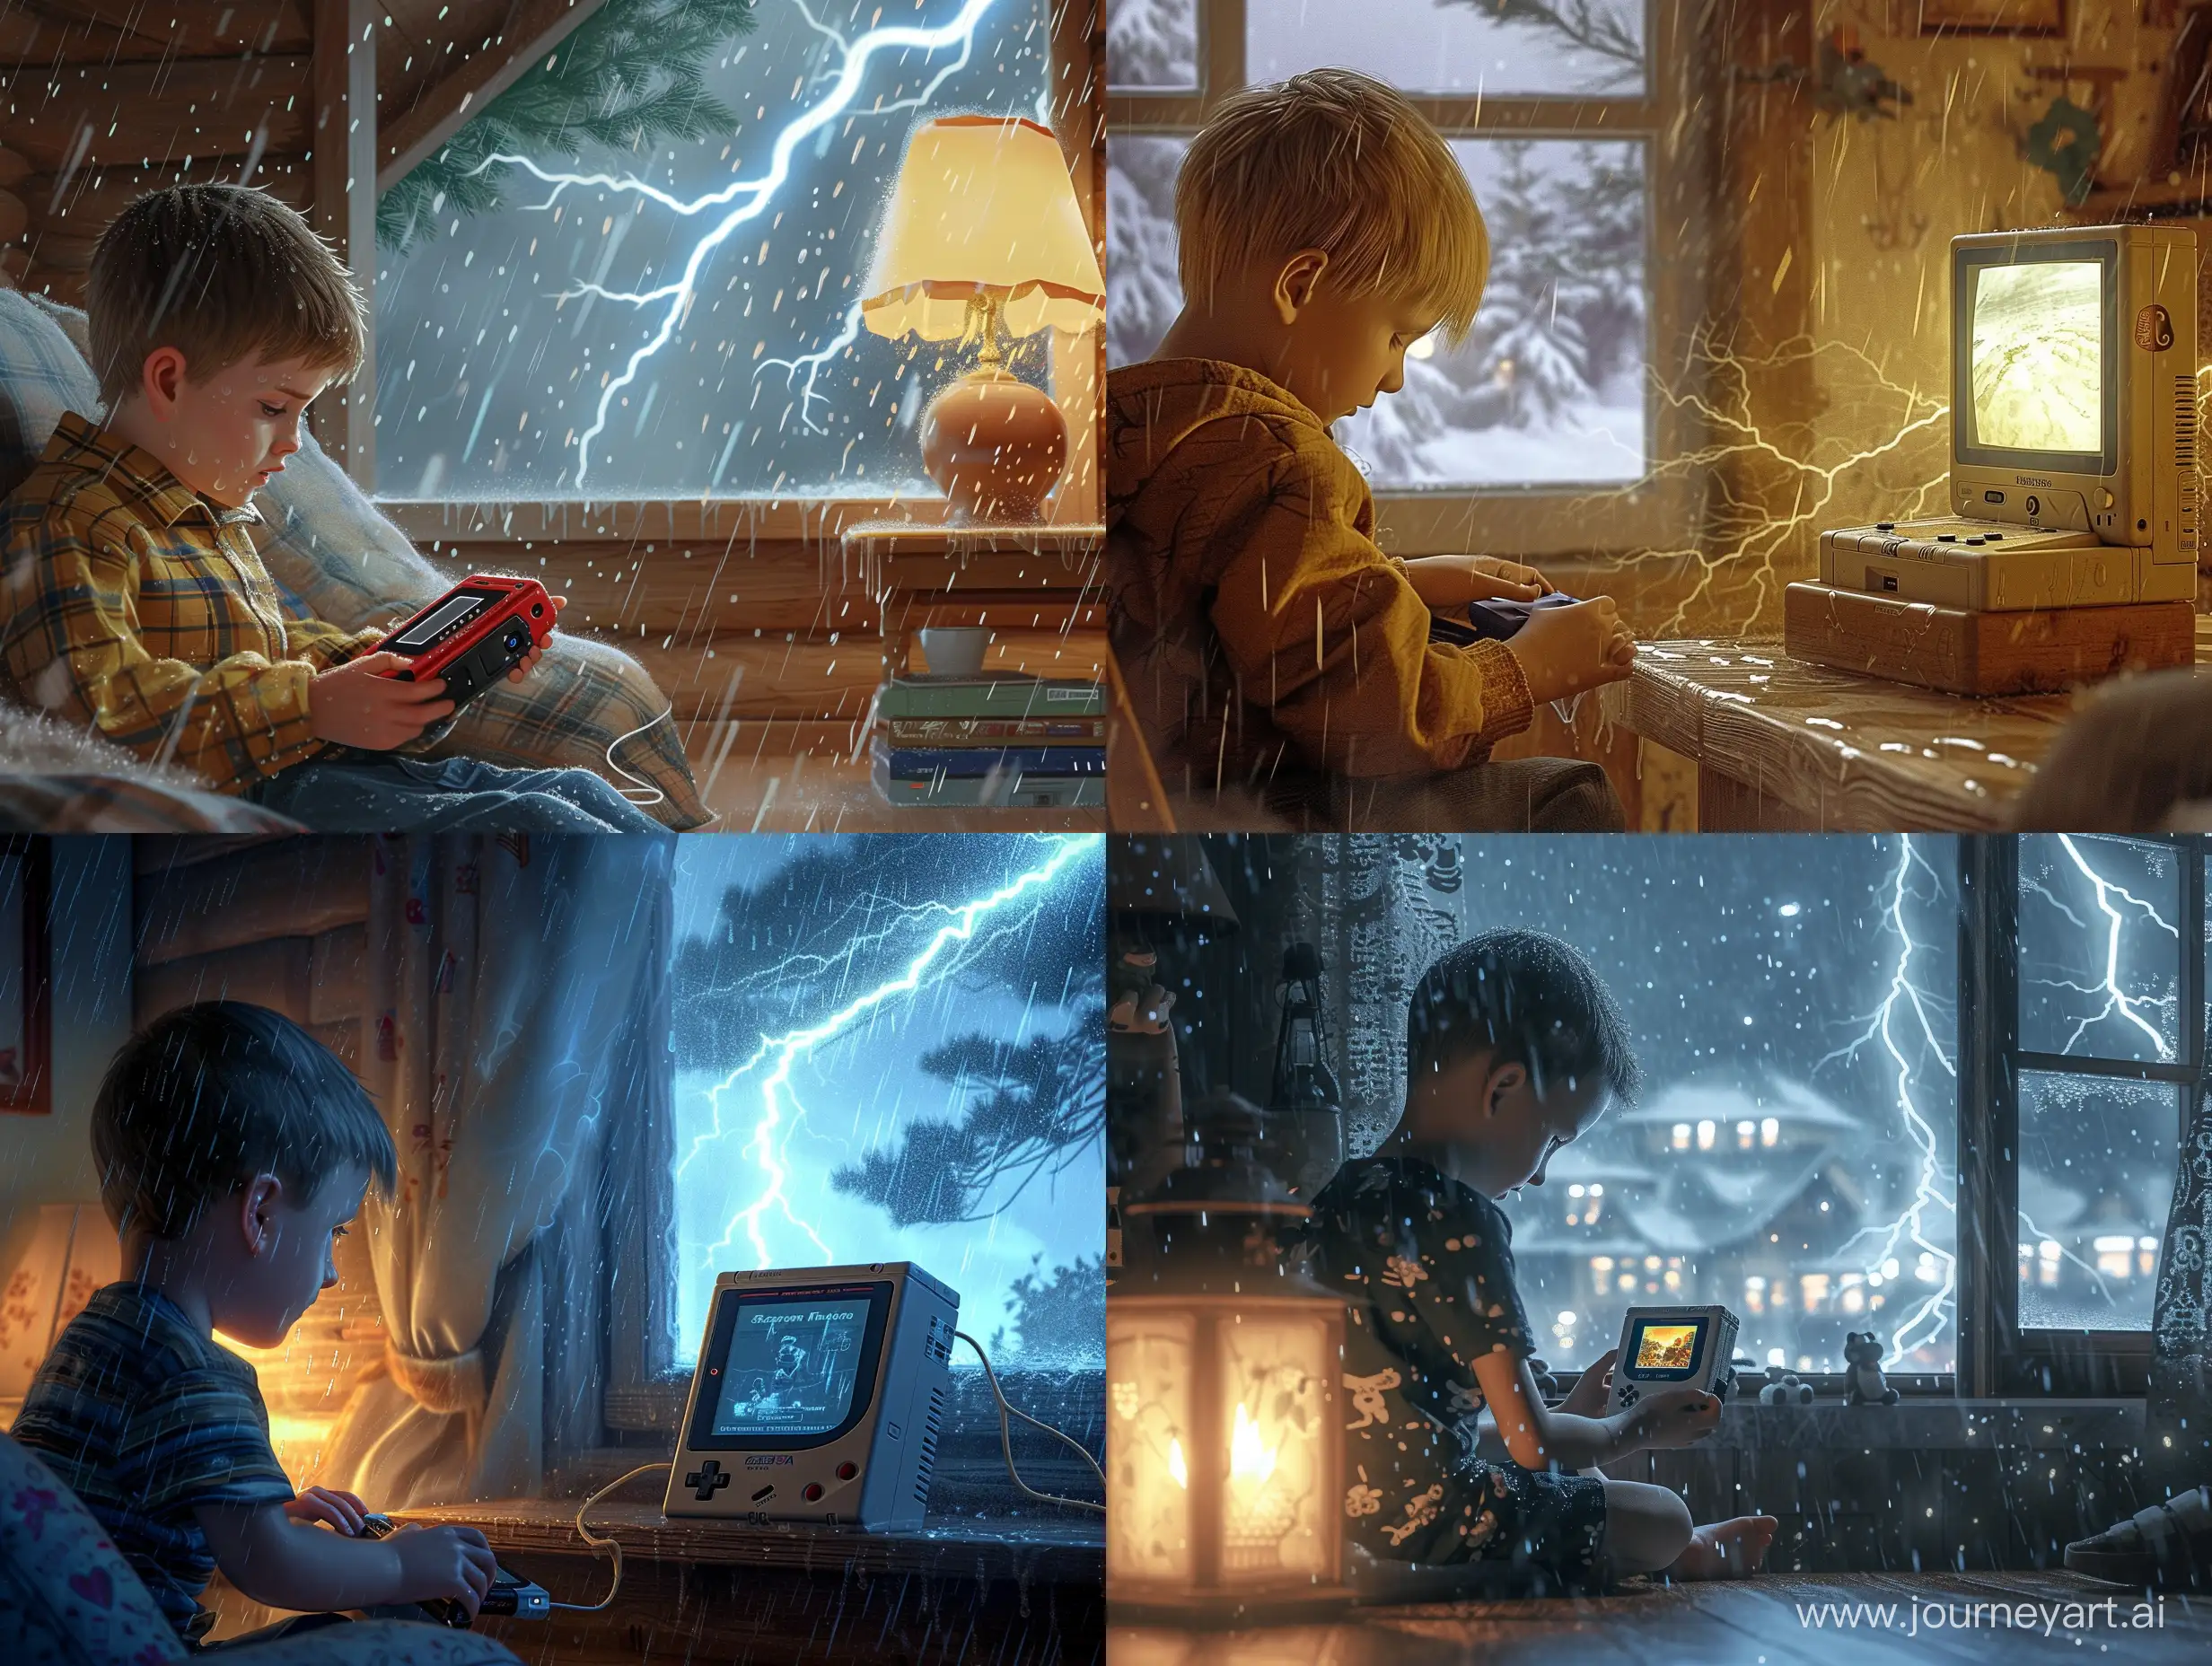 Cozy-Rainy-Day-Young-Boy-Immersed-in-Realistic-Gameboy-Fun